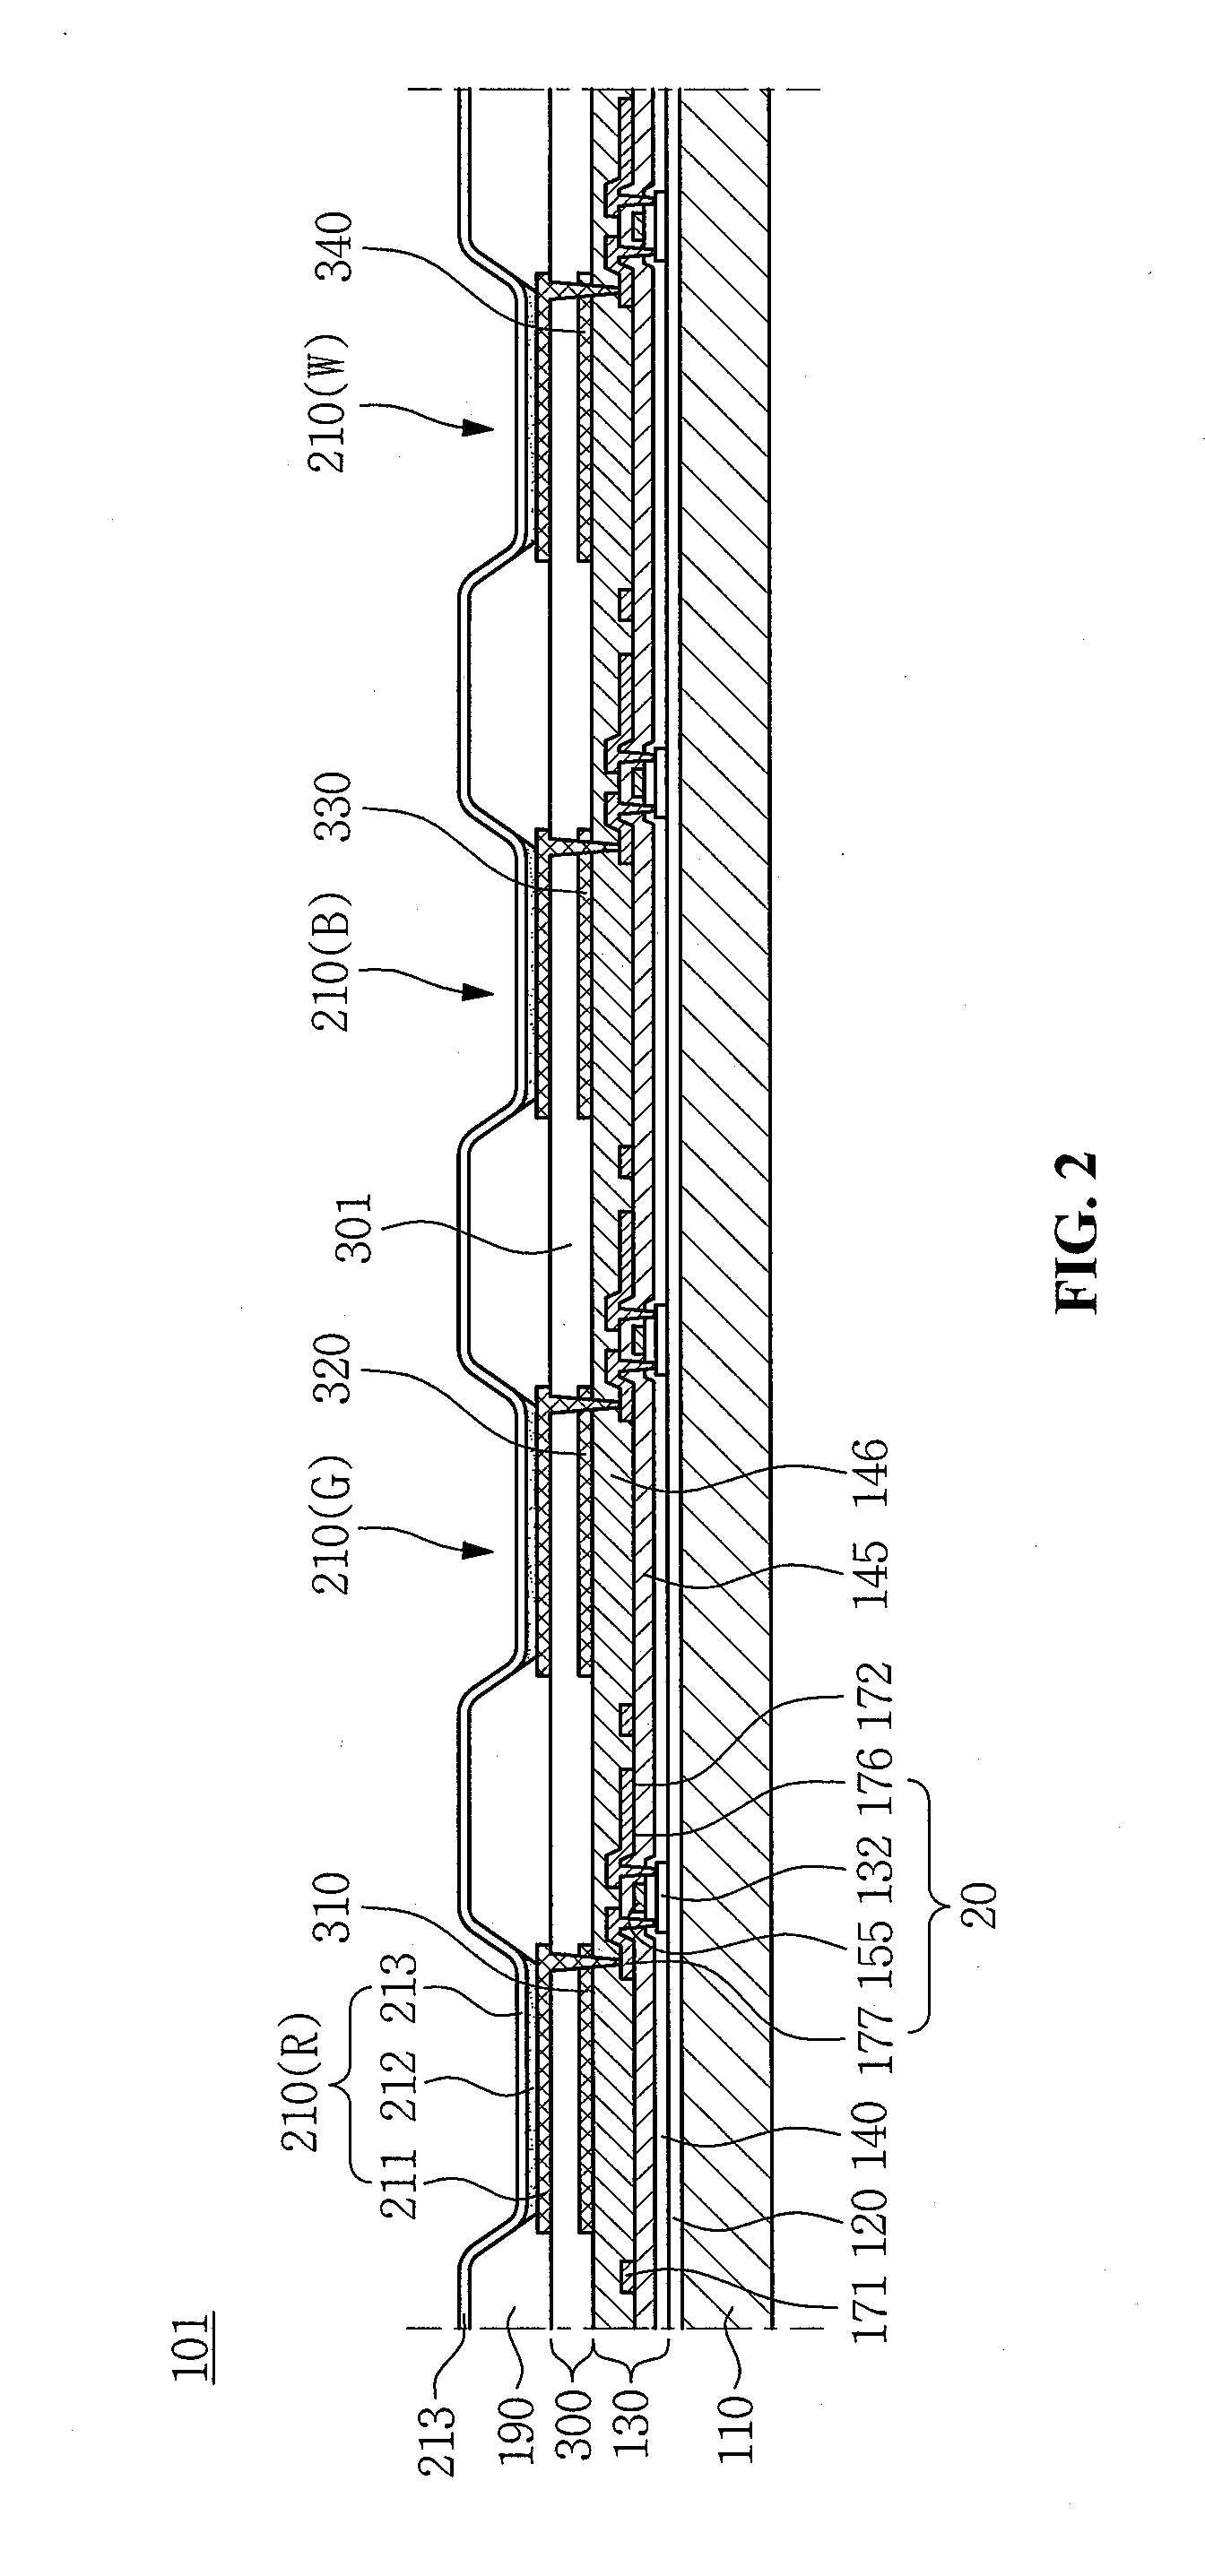 Display device comprising gray color filter